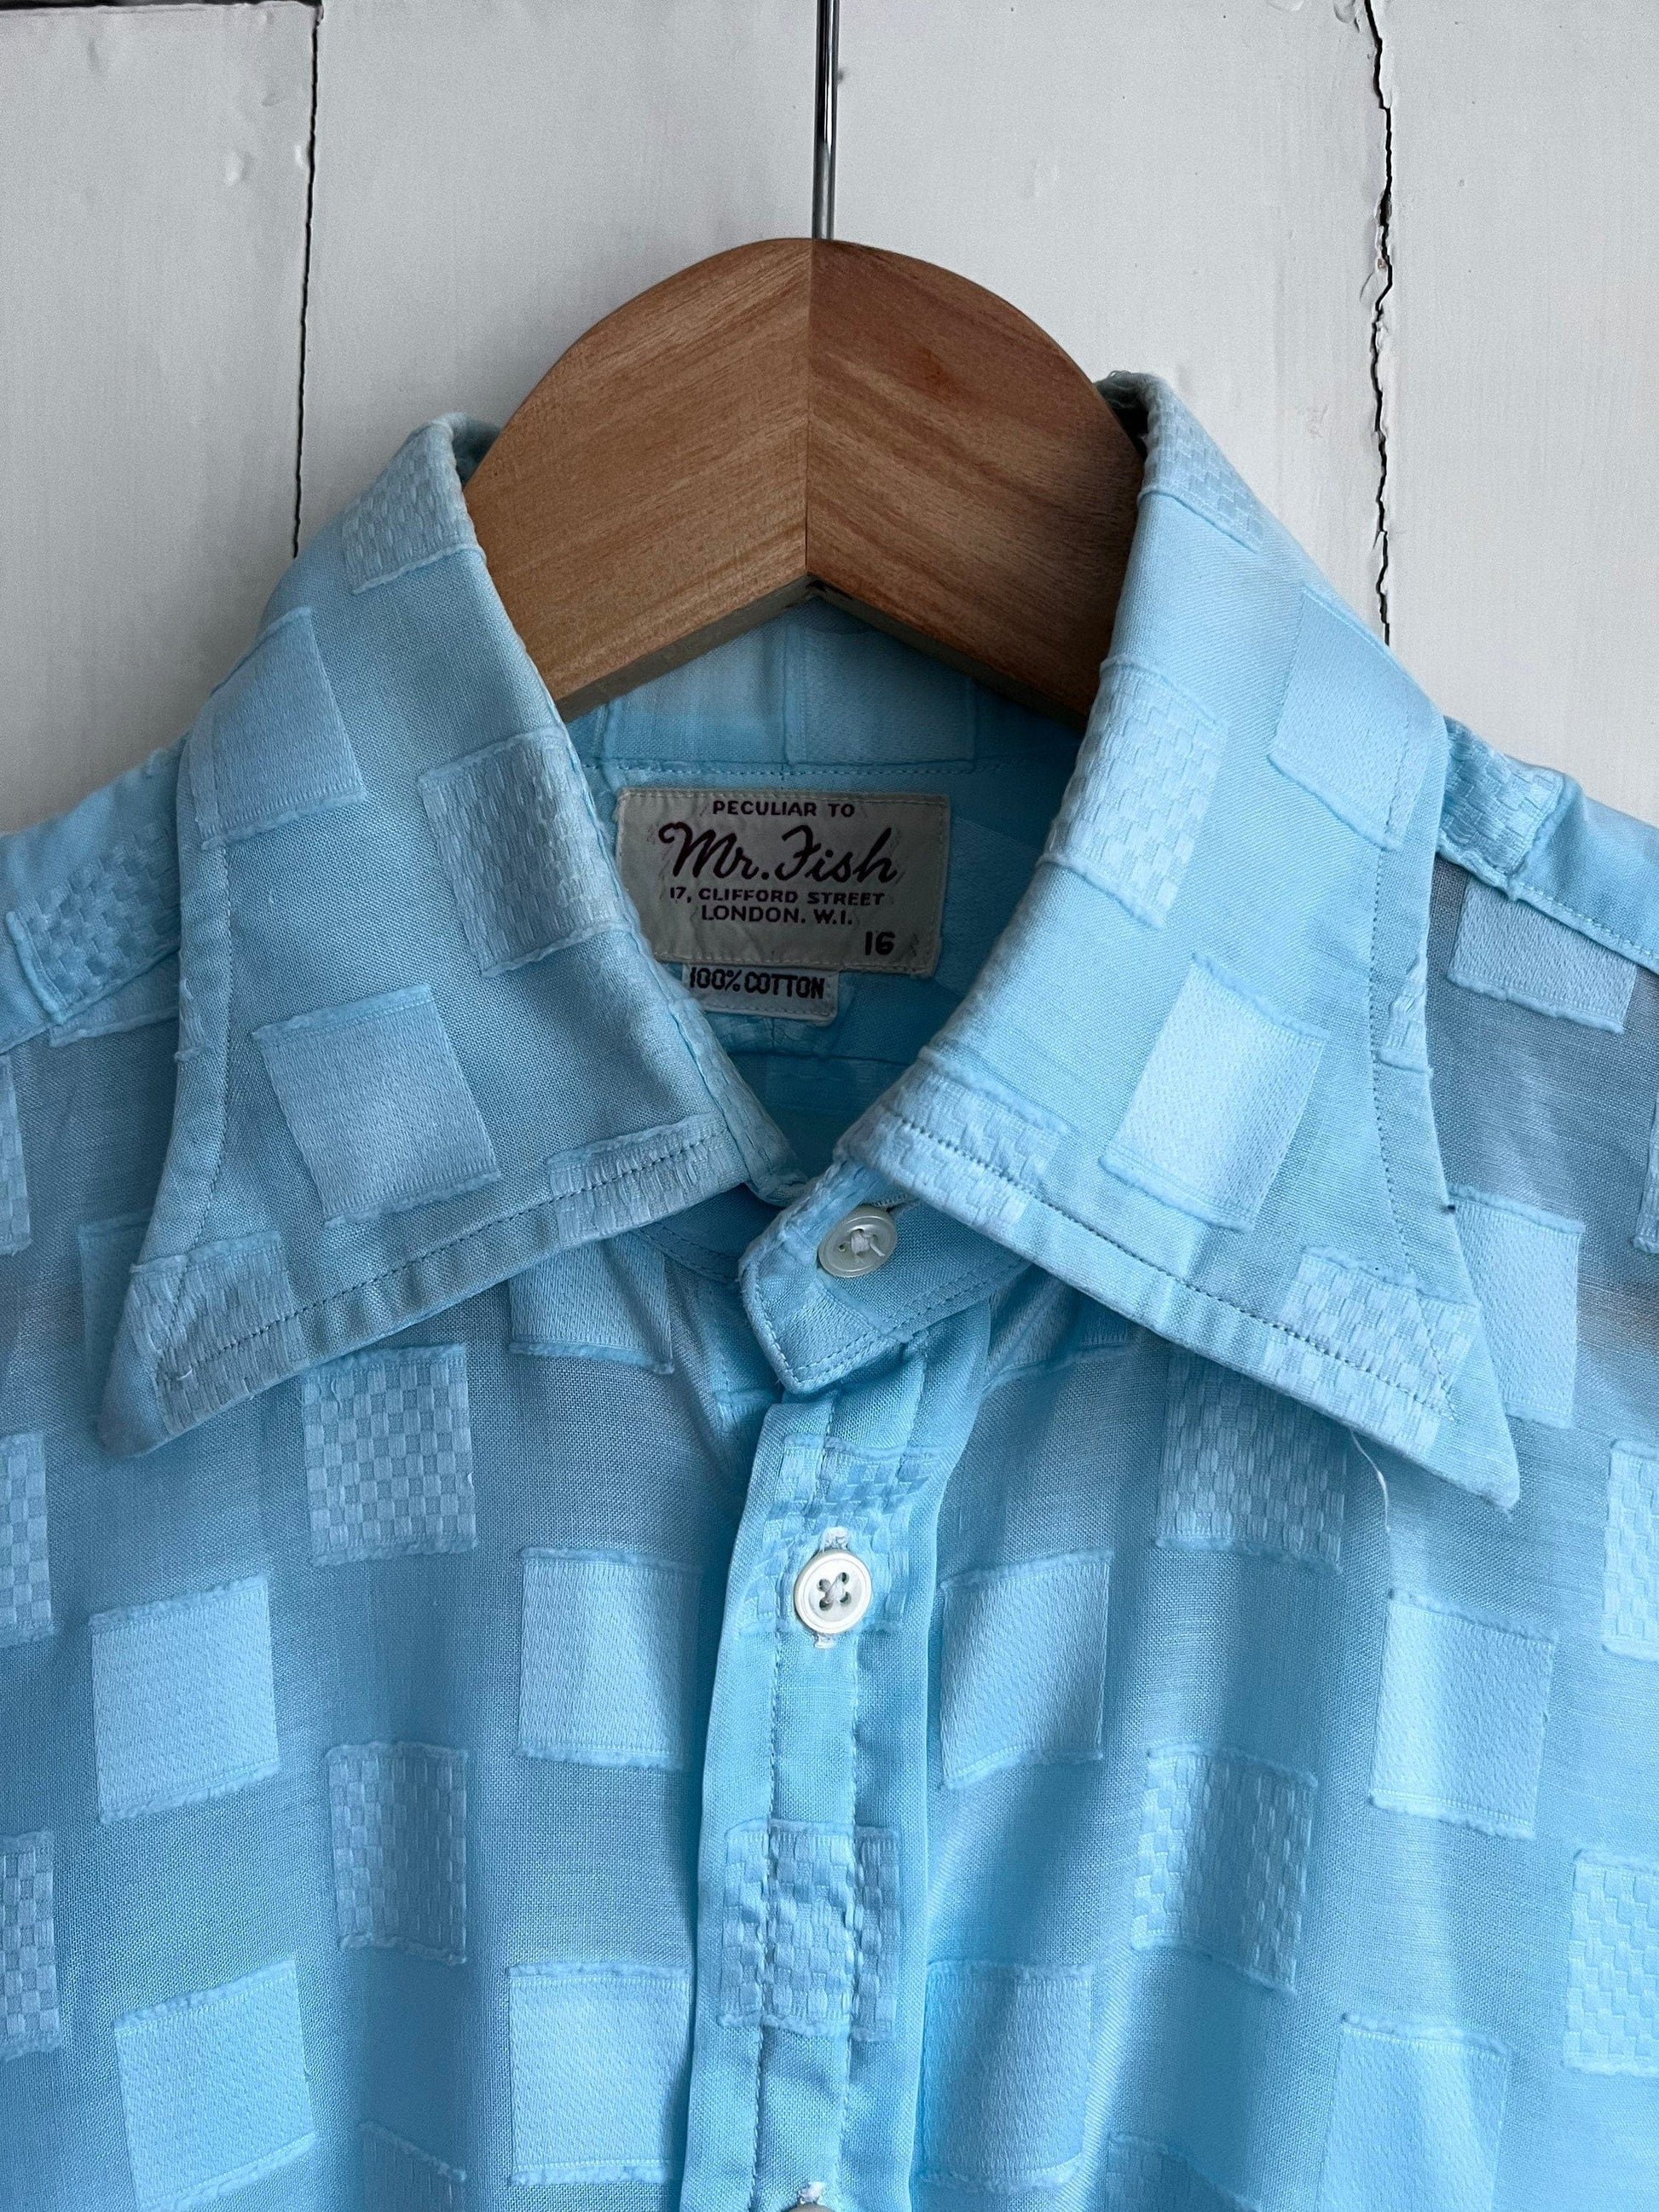 Mens 1960s Shirt Turquoise Button Down ,Peculiar to Mr Fish, Mens Vintage Cotton Shirt, 60s,Peacock Revolution, British Designer, double cuf